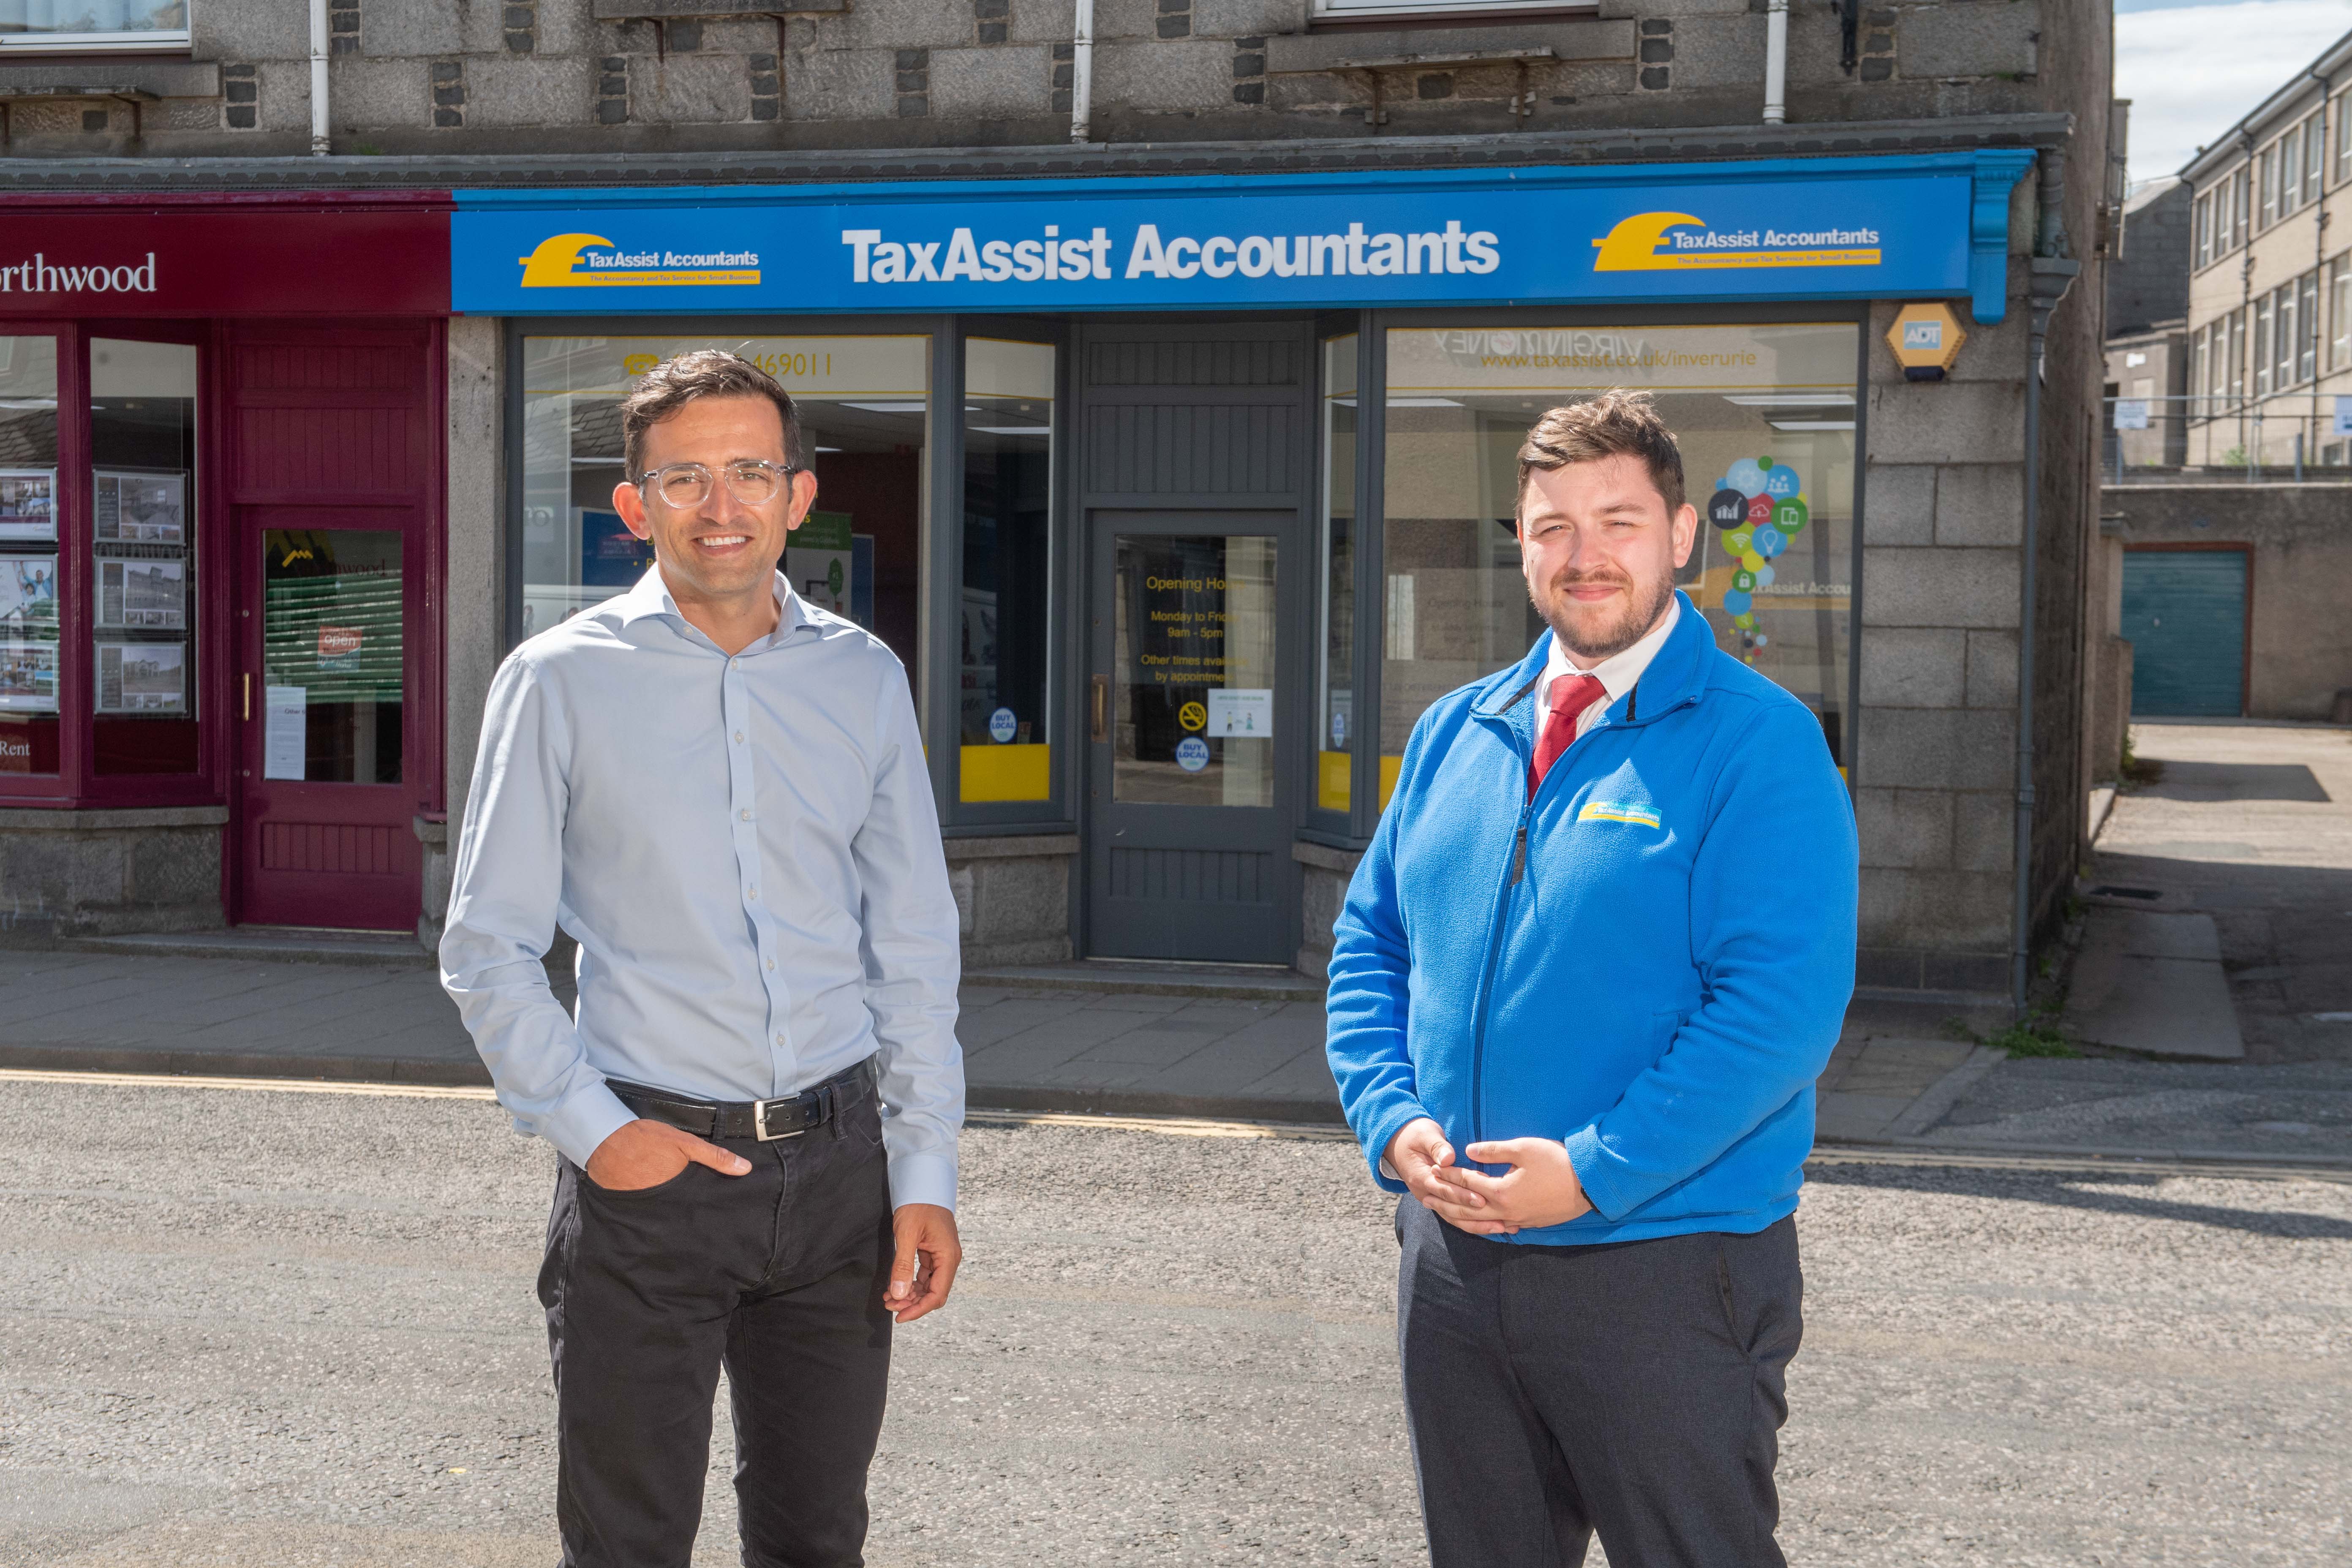 TaxAssist Accountants secures £175,000 funding boost from RBS